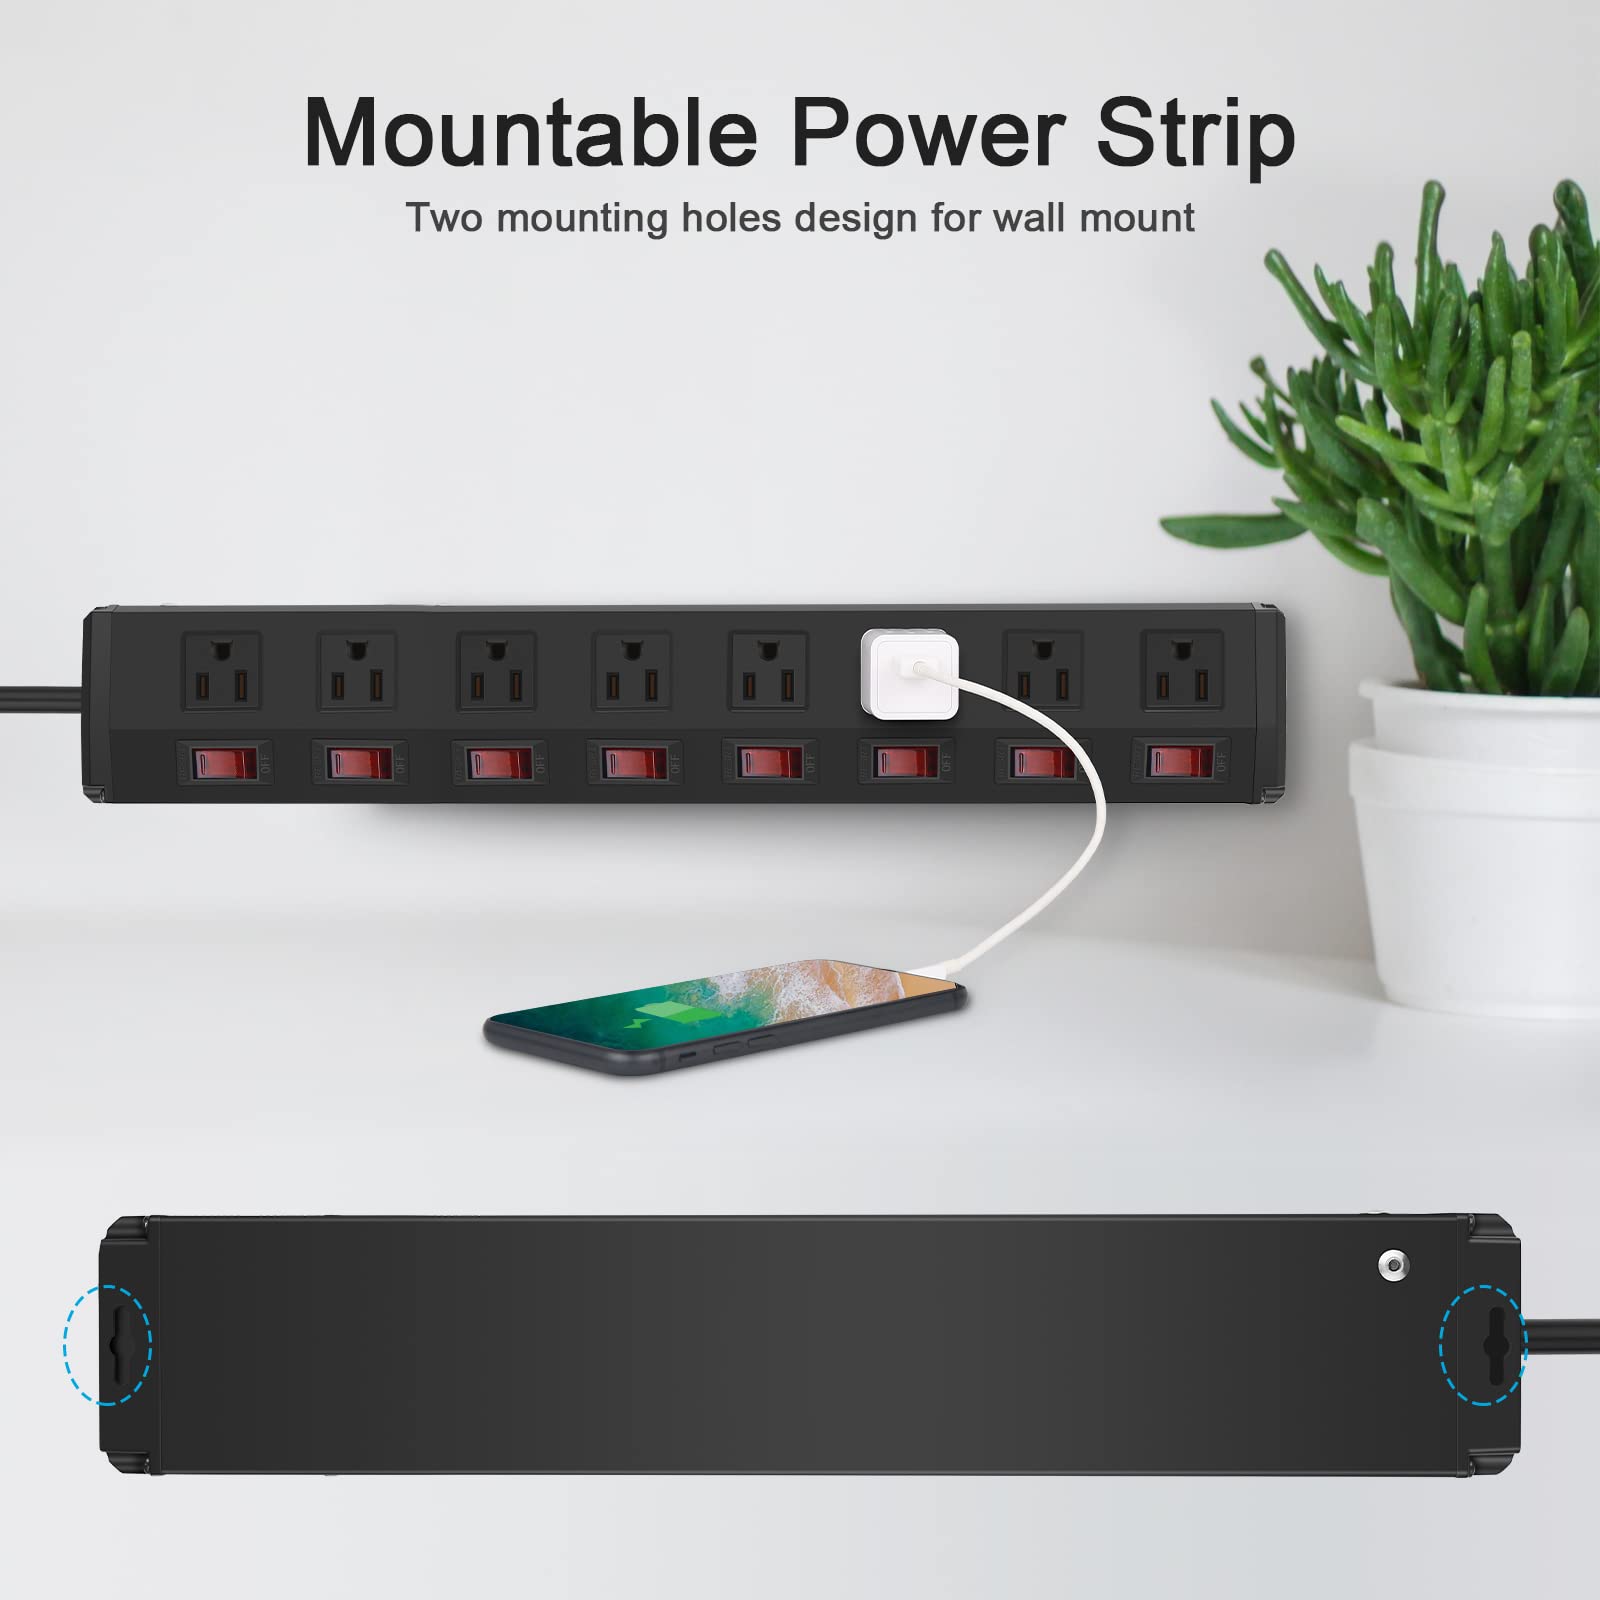 Metal Power Strip Individual Switches 8 Outlets, Heavy Duty Power Strip Surge Protector for Appliances, 6 FT Extension Cord Strip, 1200J Surge Protector 15A 120V 1800W.